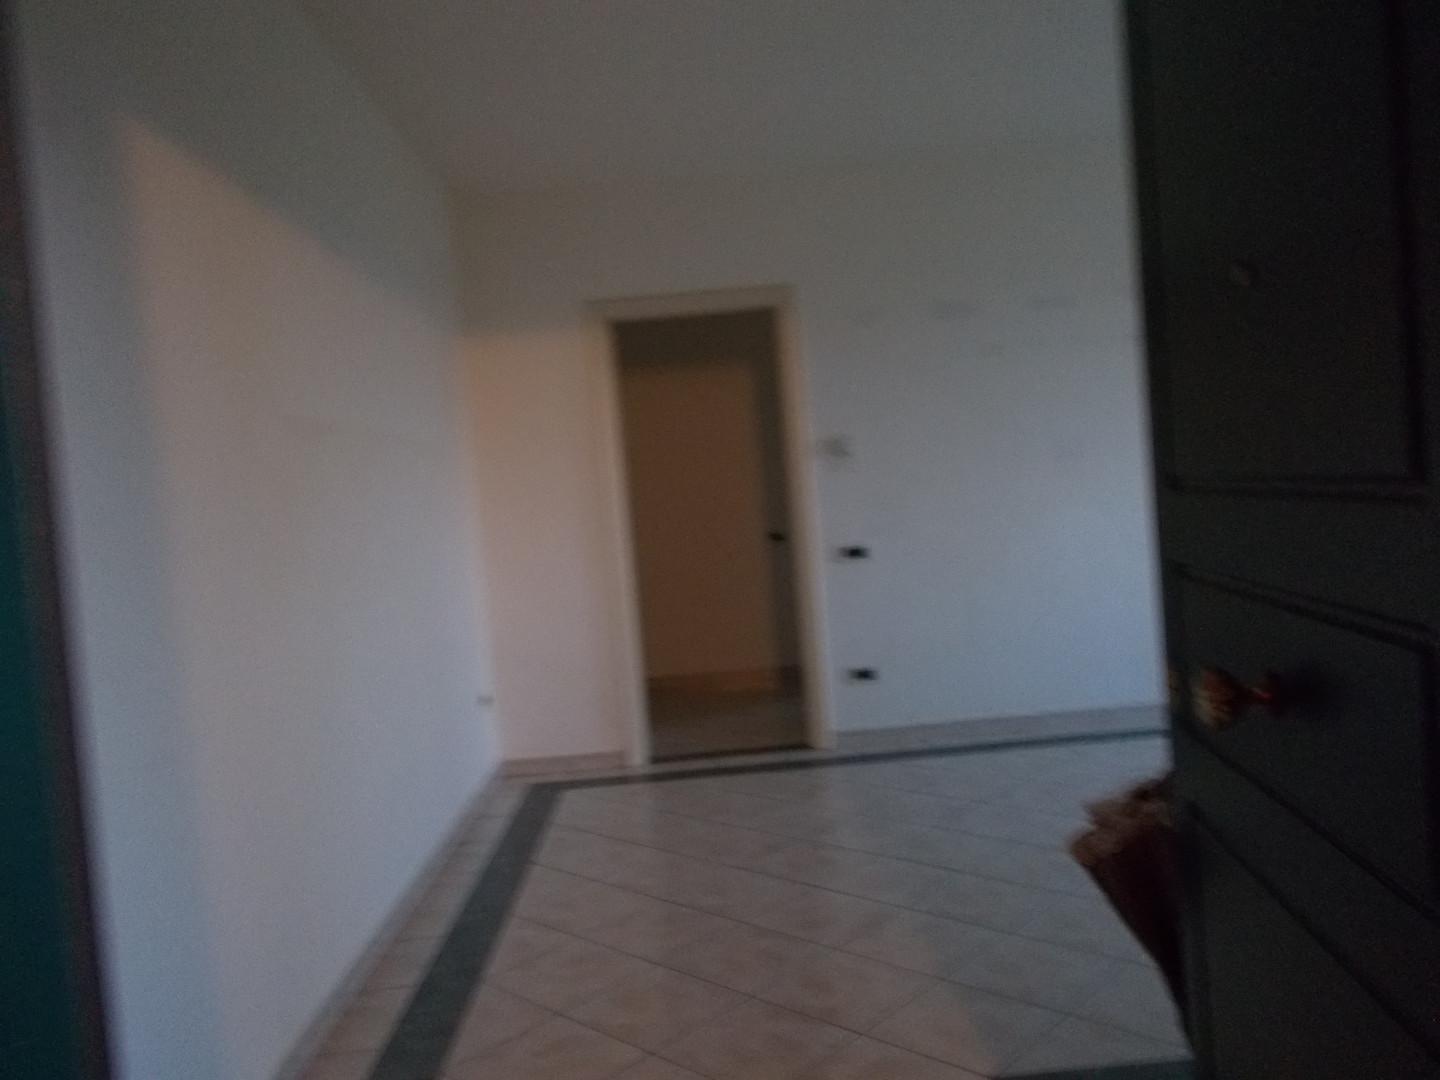 Apartment for rent in Ponsacco (PI)